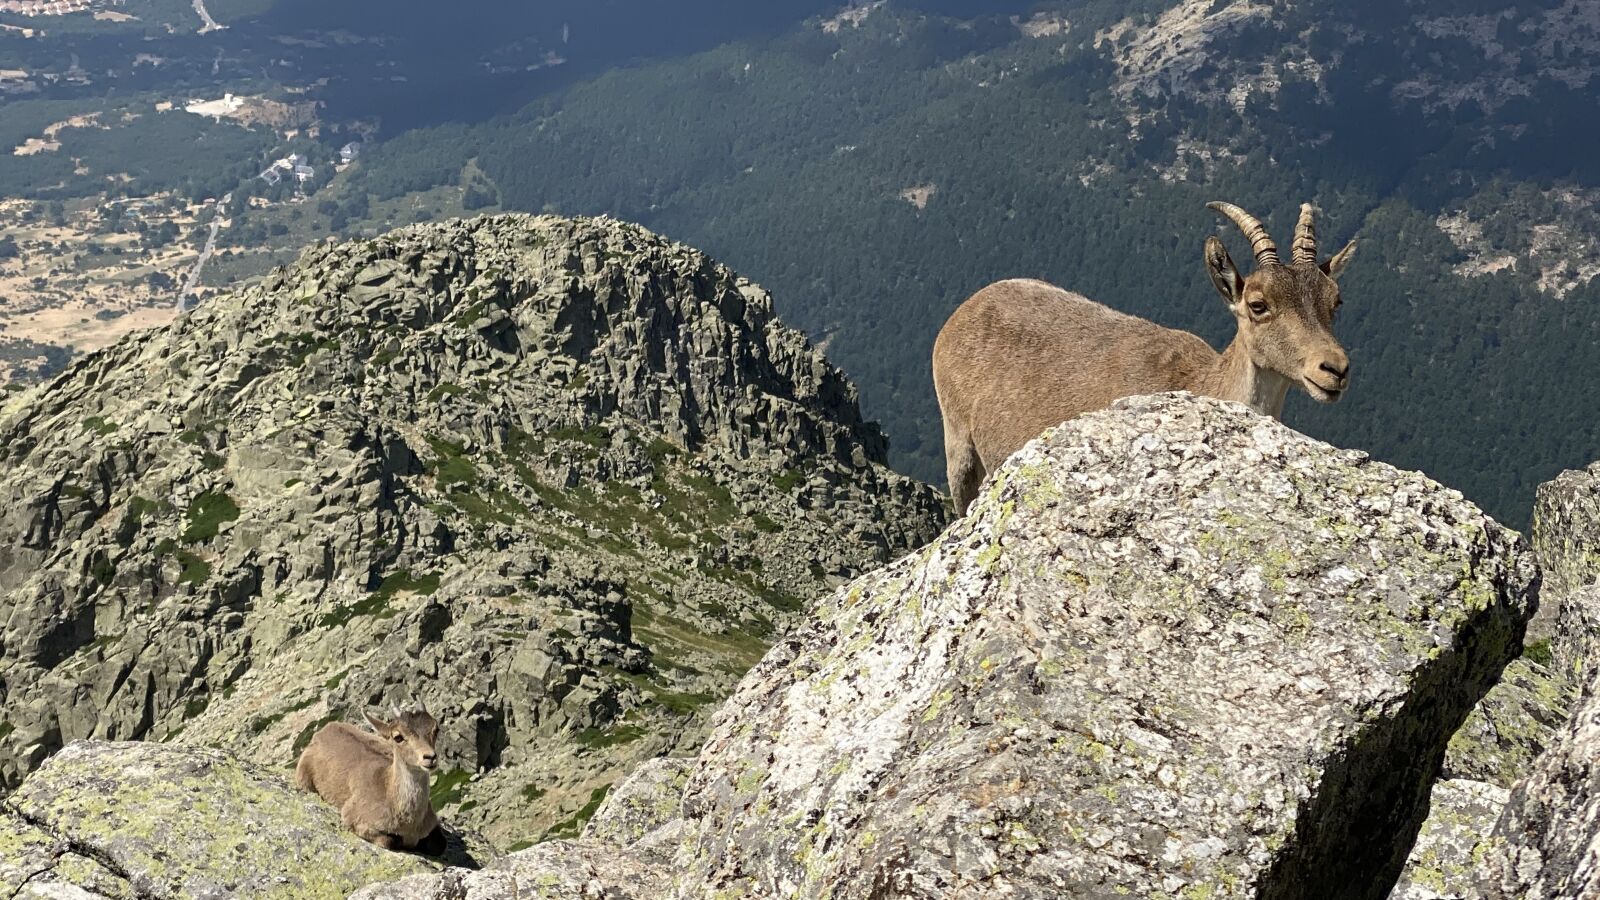 iPhone 11 Pro Max back triple camera 6mm f/2 sample photo. Mountains, goat, rocks photography